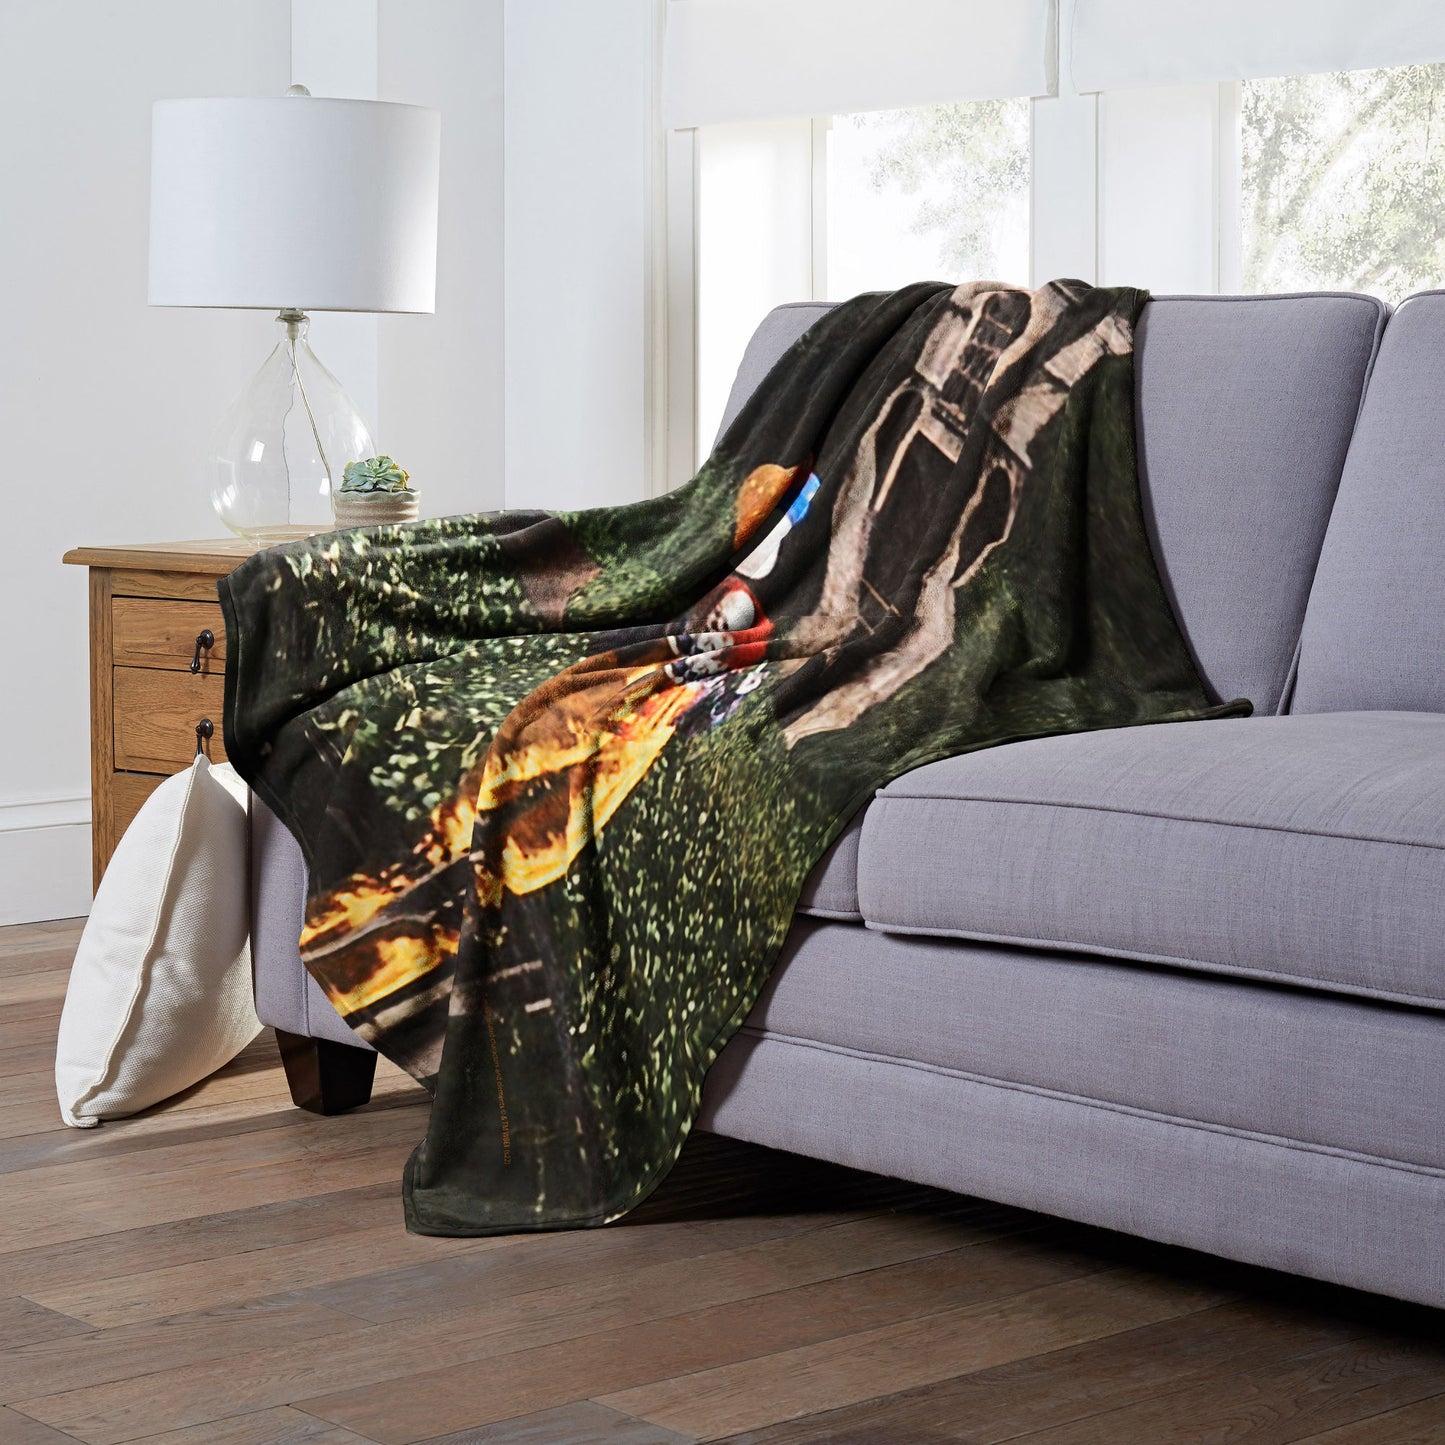 IT Miniseries Silk Touch Throw Blanket 50"x60", It Beckons